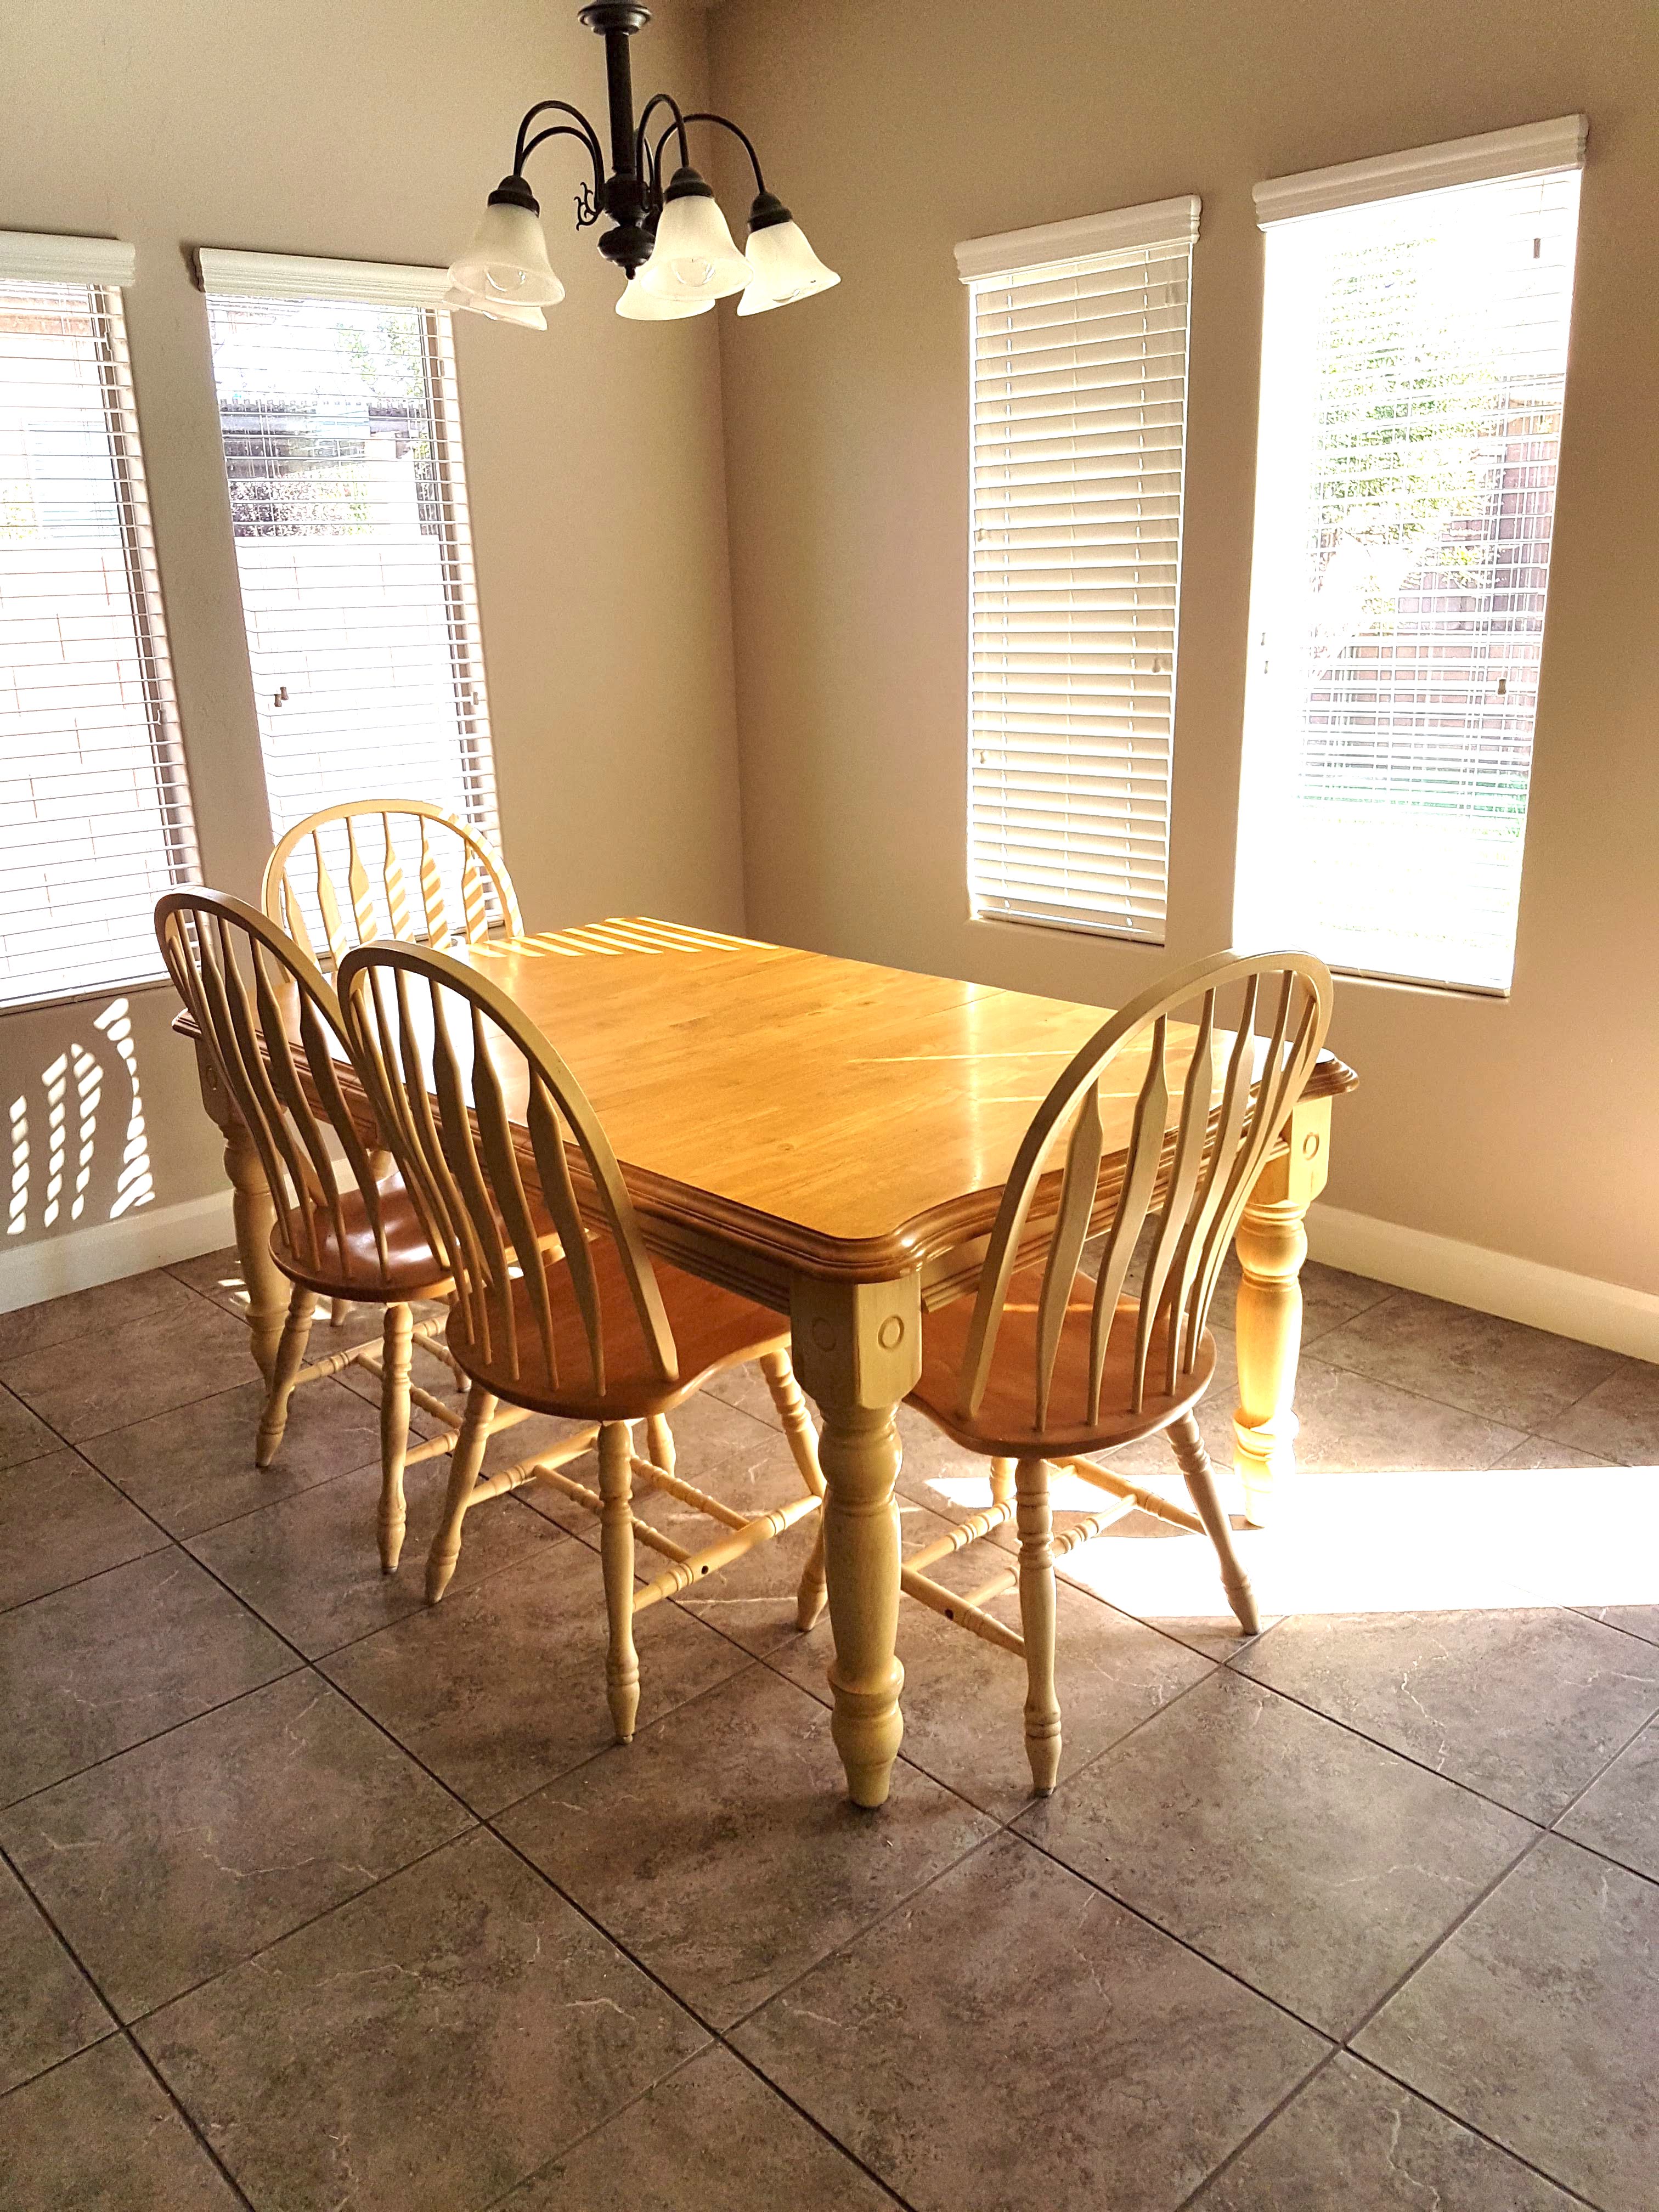 Yellowy dining table and chairs set